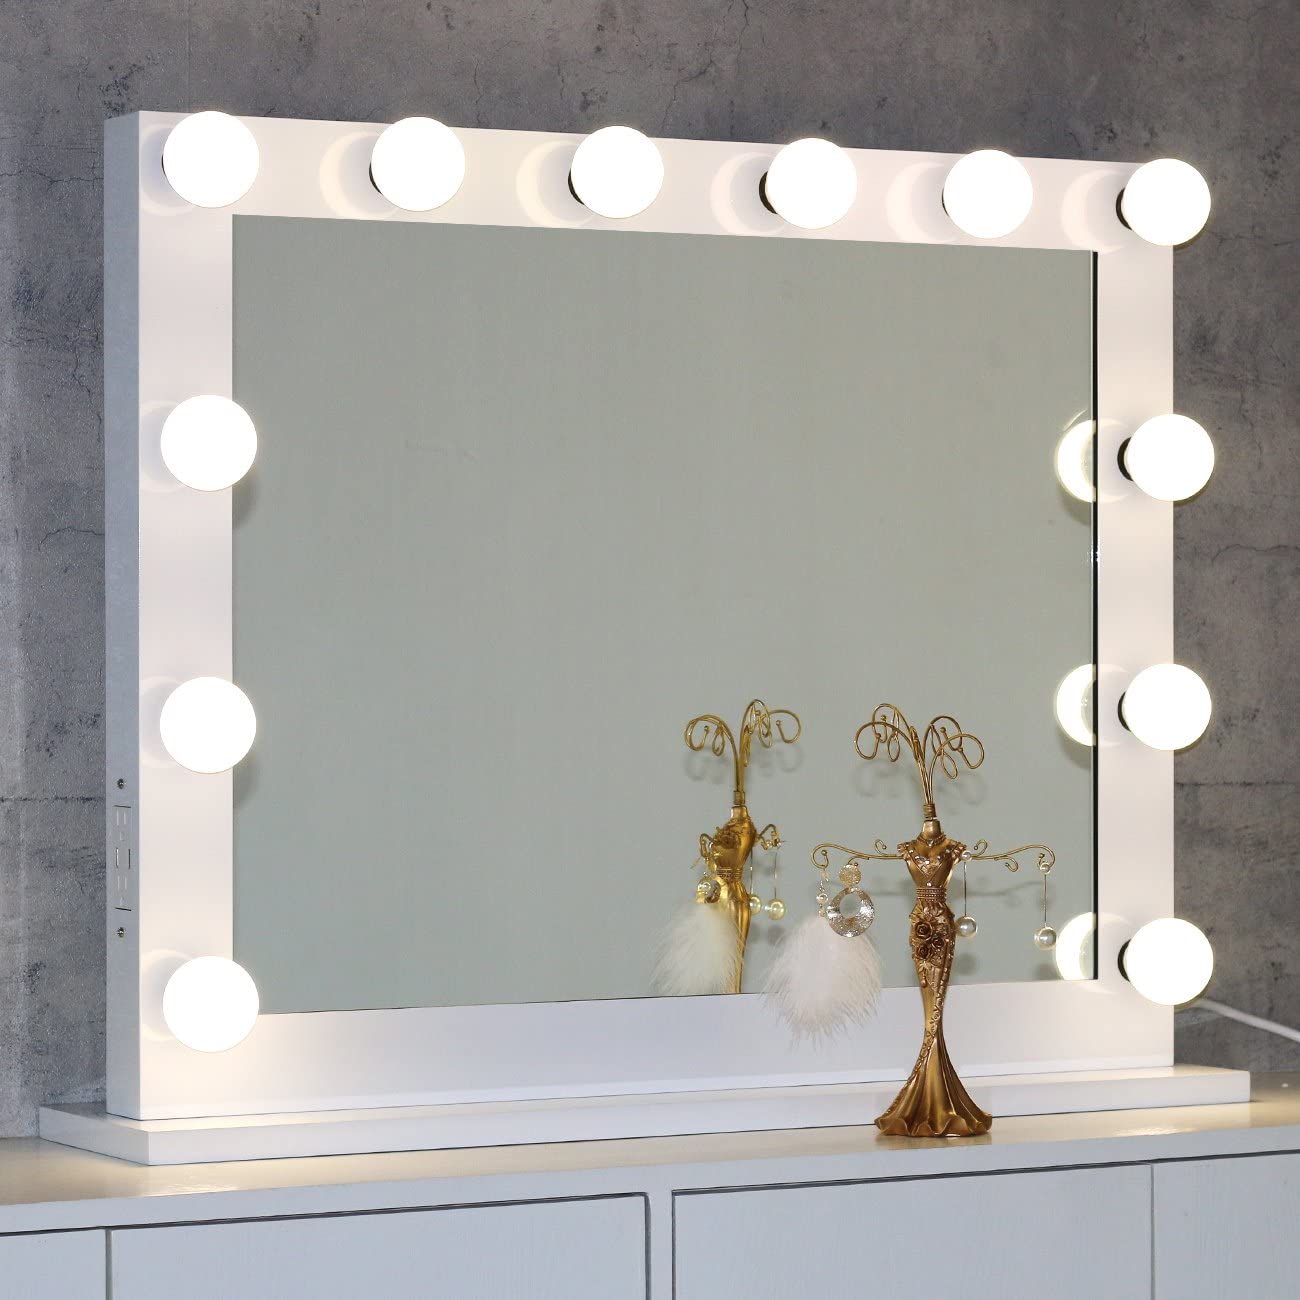 Top 7 Best Light Up Vanity Mirrors, Best Choice Products Hollywood Makeup Vanity Mirror